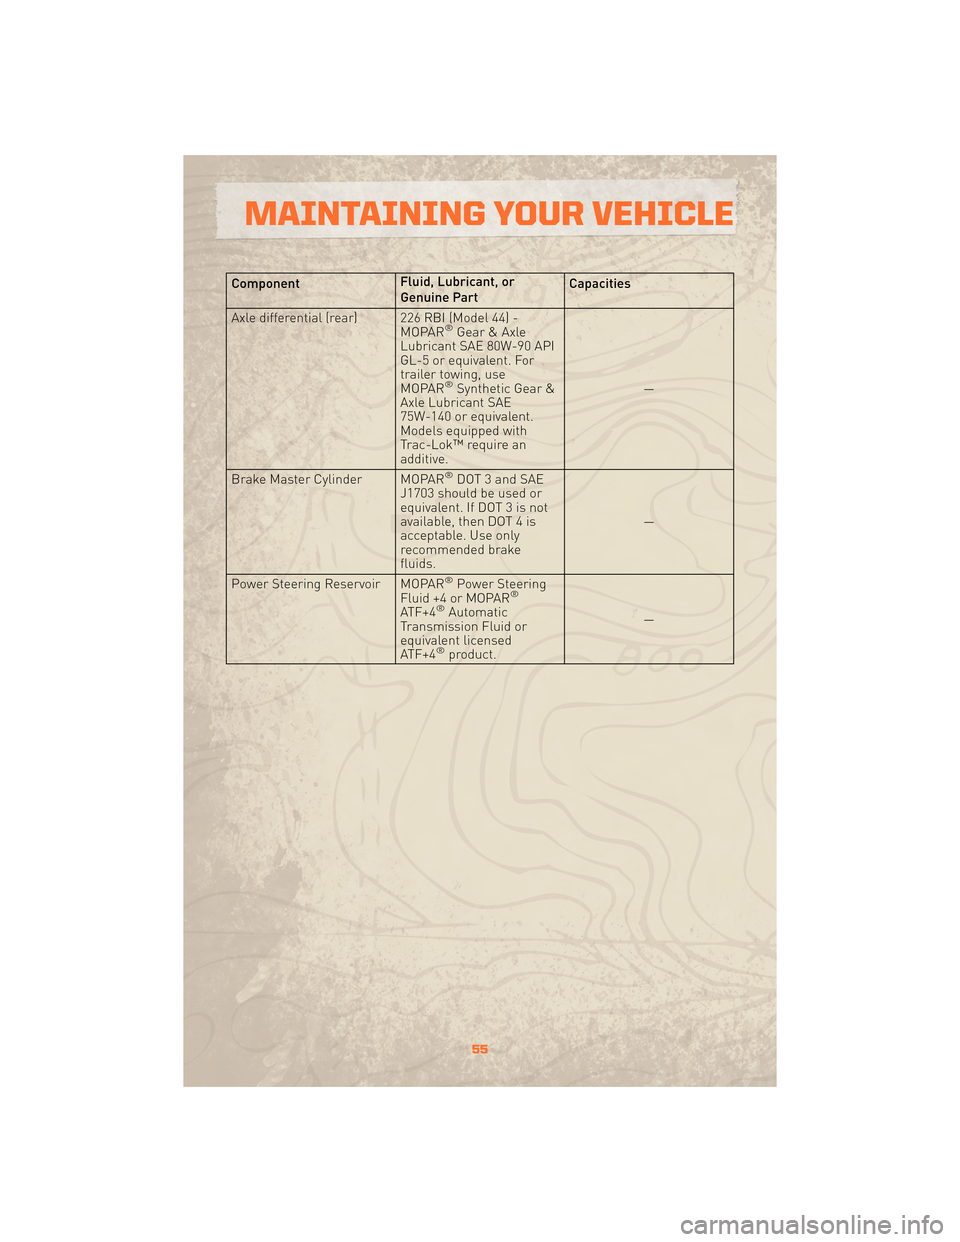 JEEP WRANGLER 2010 JK / 3.G User Guide ComponentFluid, Lubricant, or
Genuine PartCapacities
Axle differential (rear) 226 RBI (Model 44) - MOPAR
®Gear & Axle
Lubricant SAE 80W-90 API
GL-5 or equivalent. For
trailer towing, use
MOPAR
®Synt